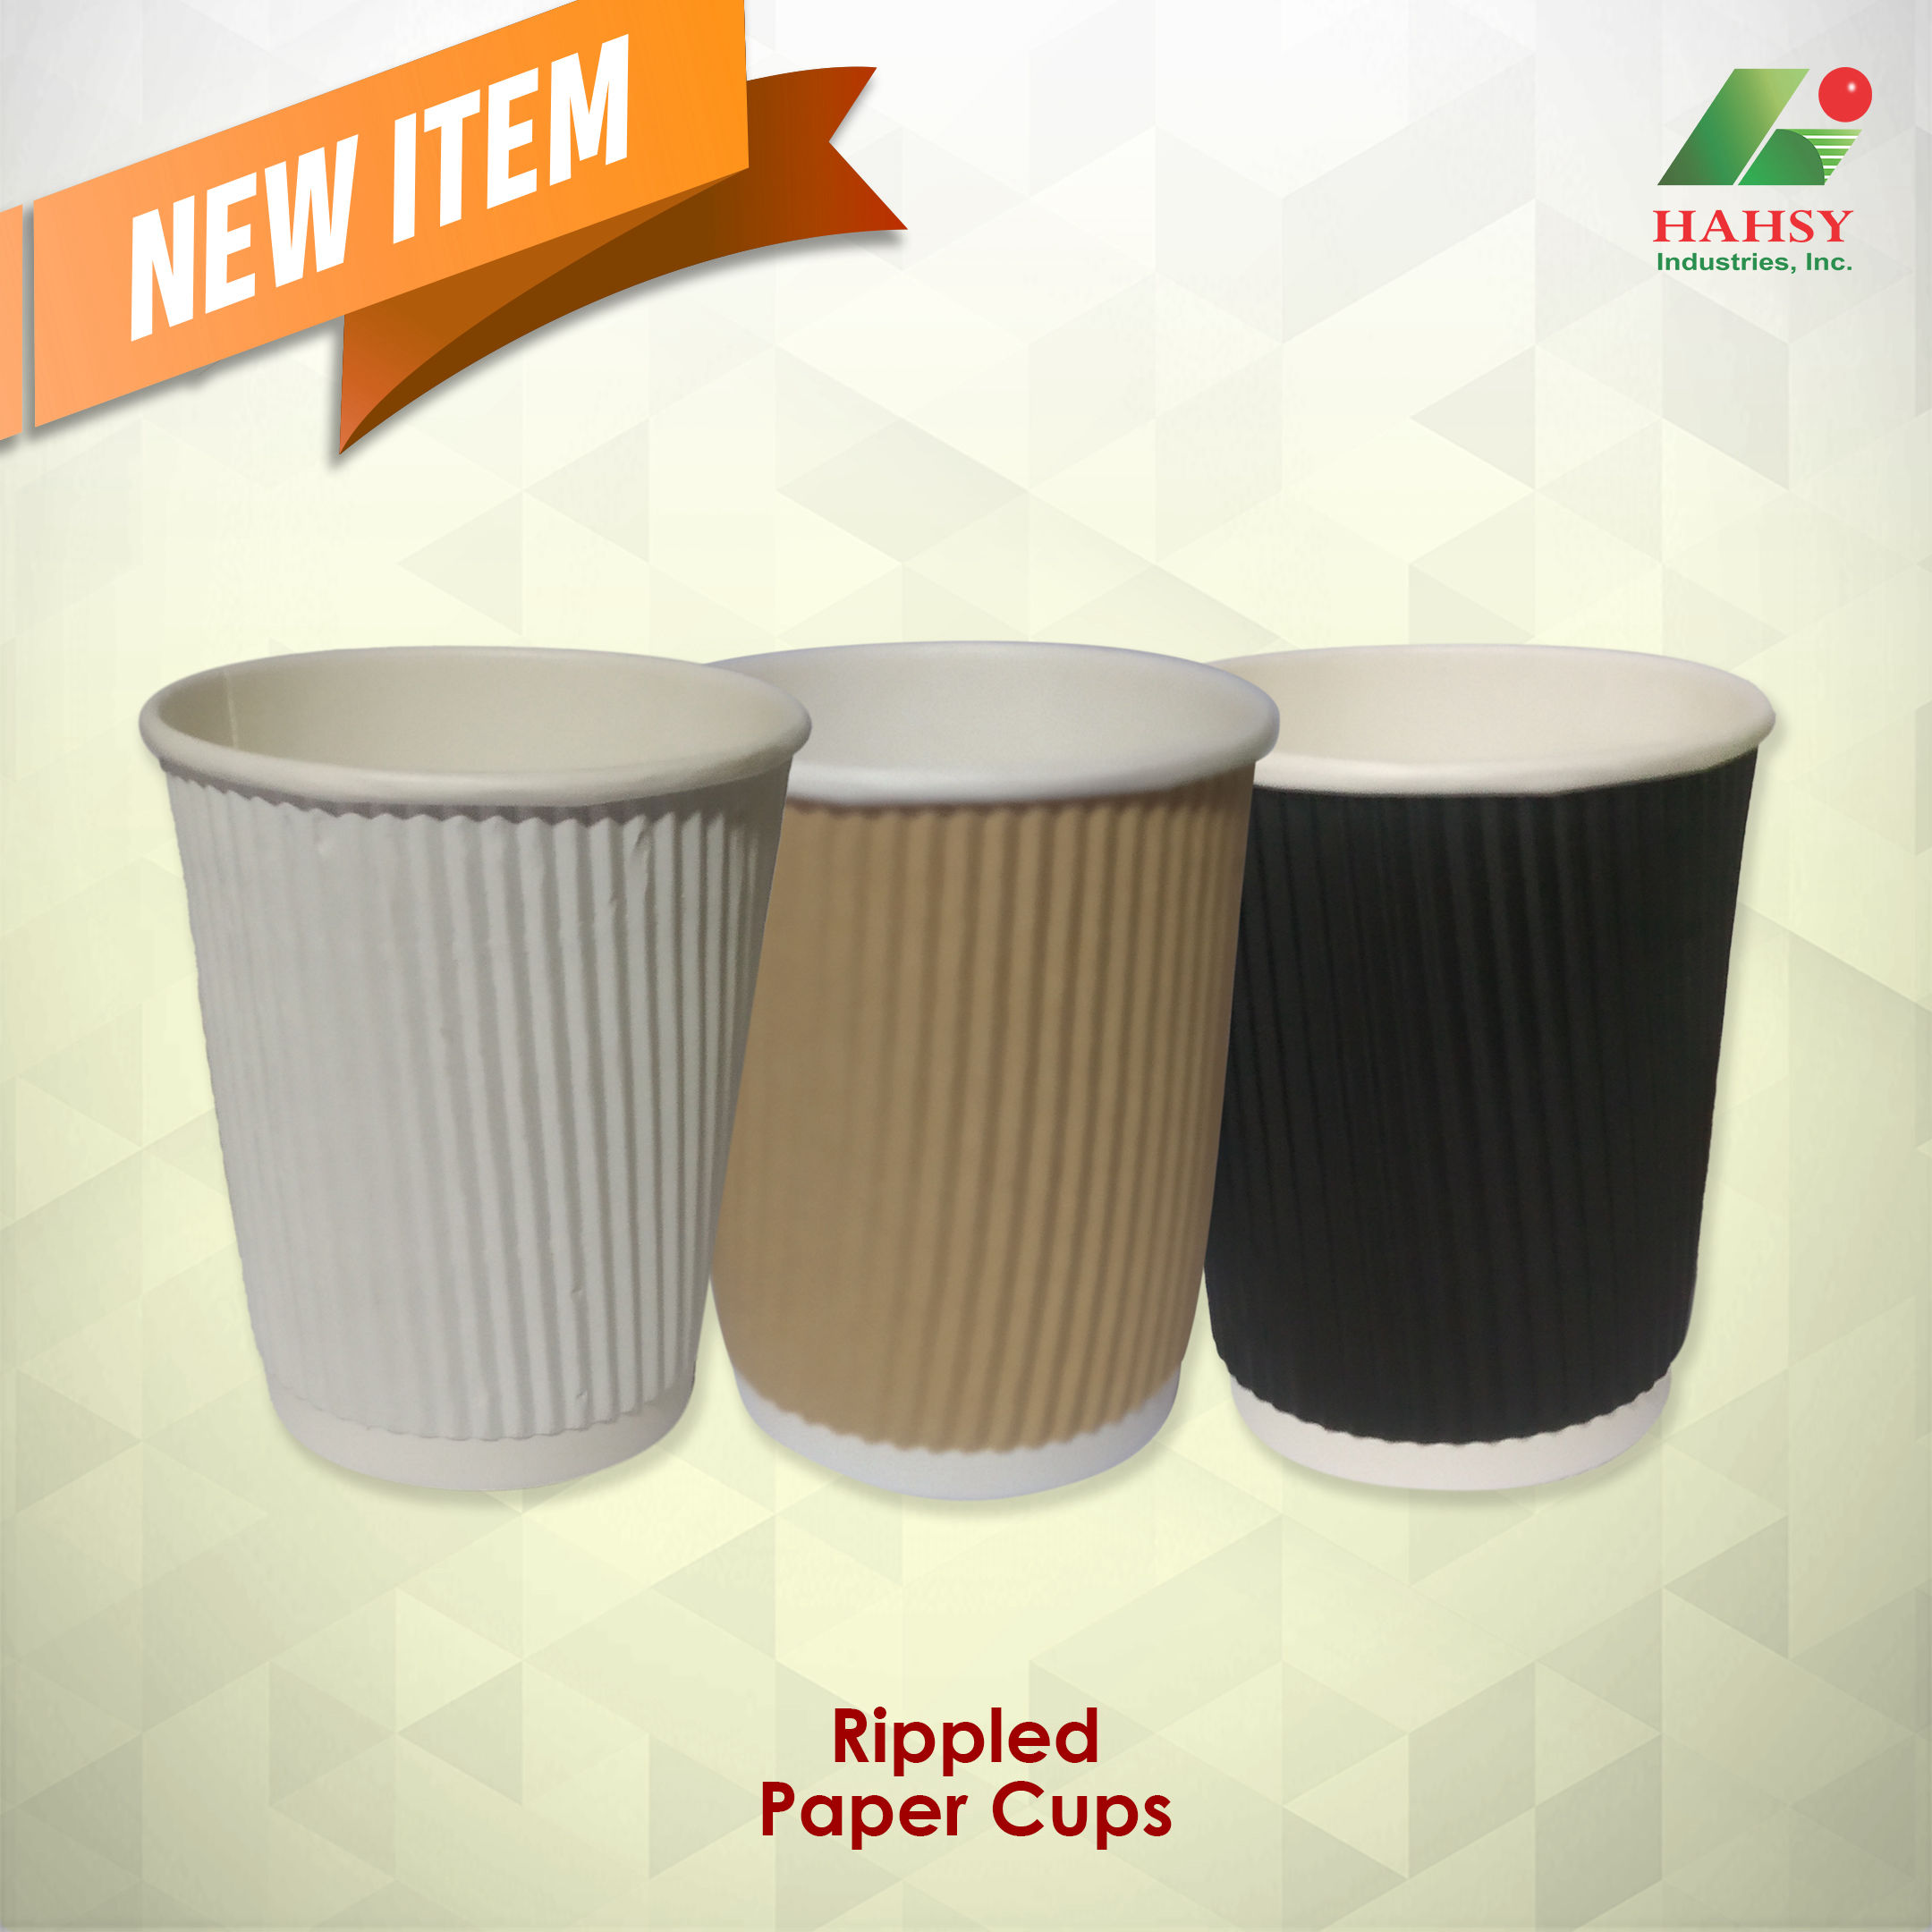 Rippled paper Cups